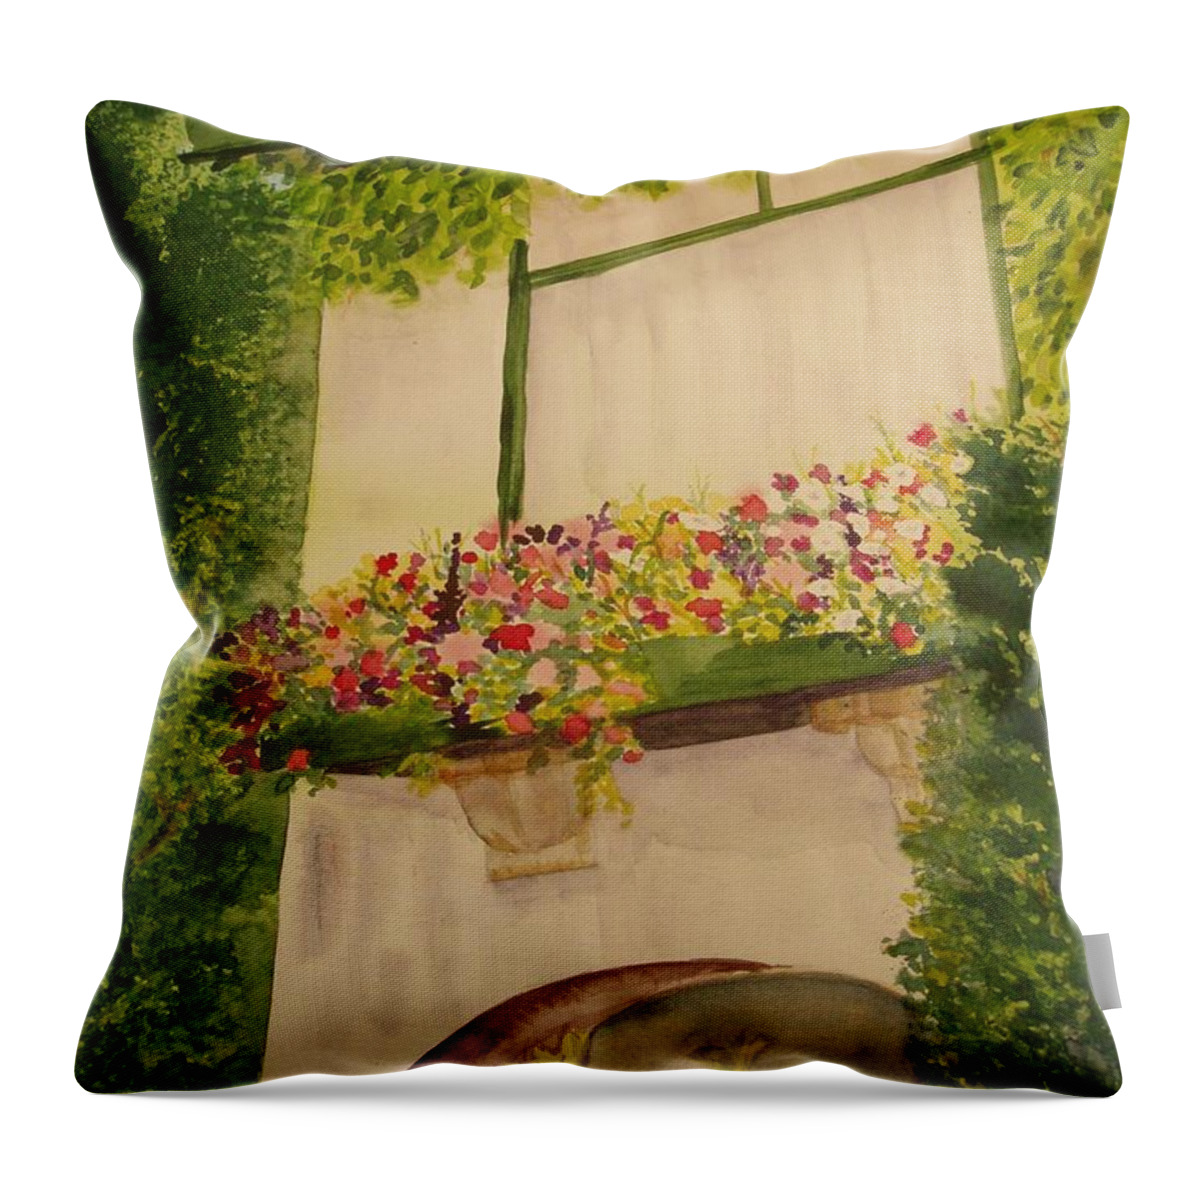 Flowers Throw Pillow featuring the painting Overlooking Butchard Gardens by Vicki Housel